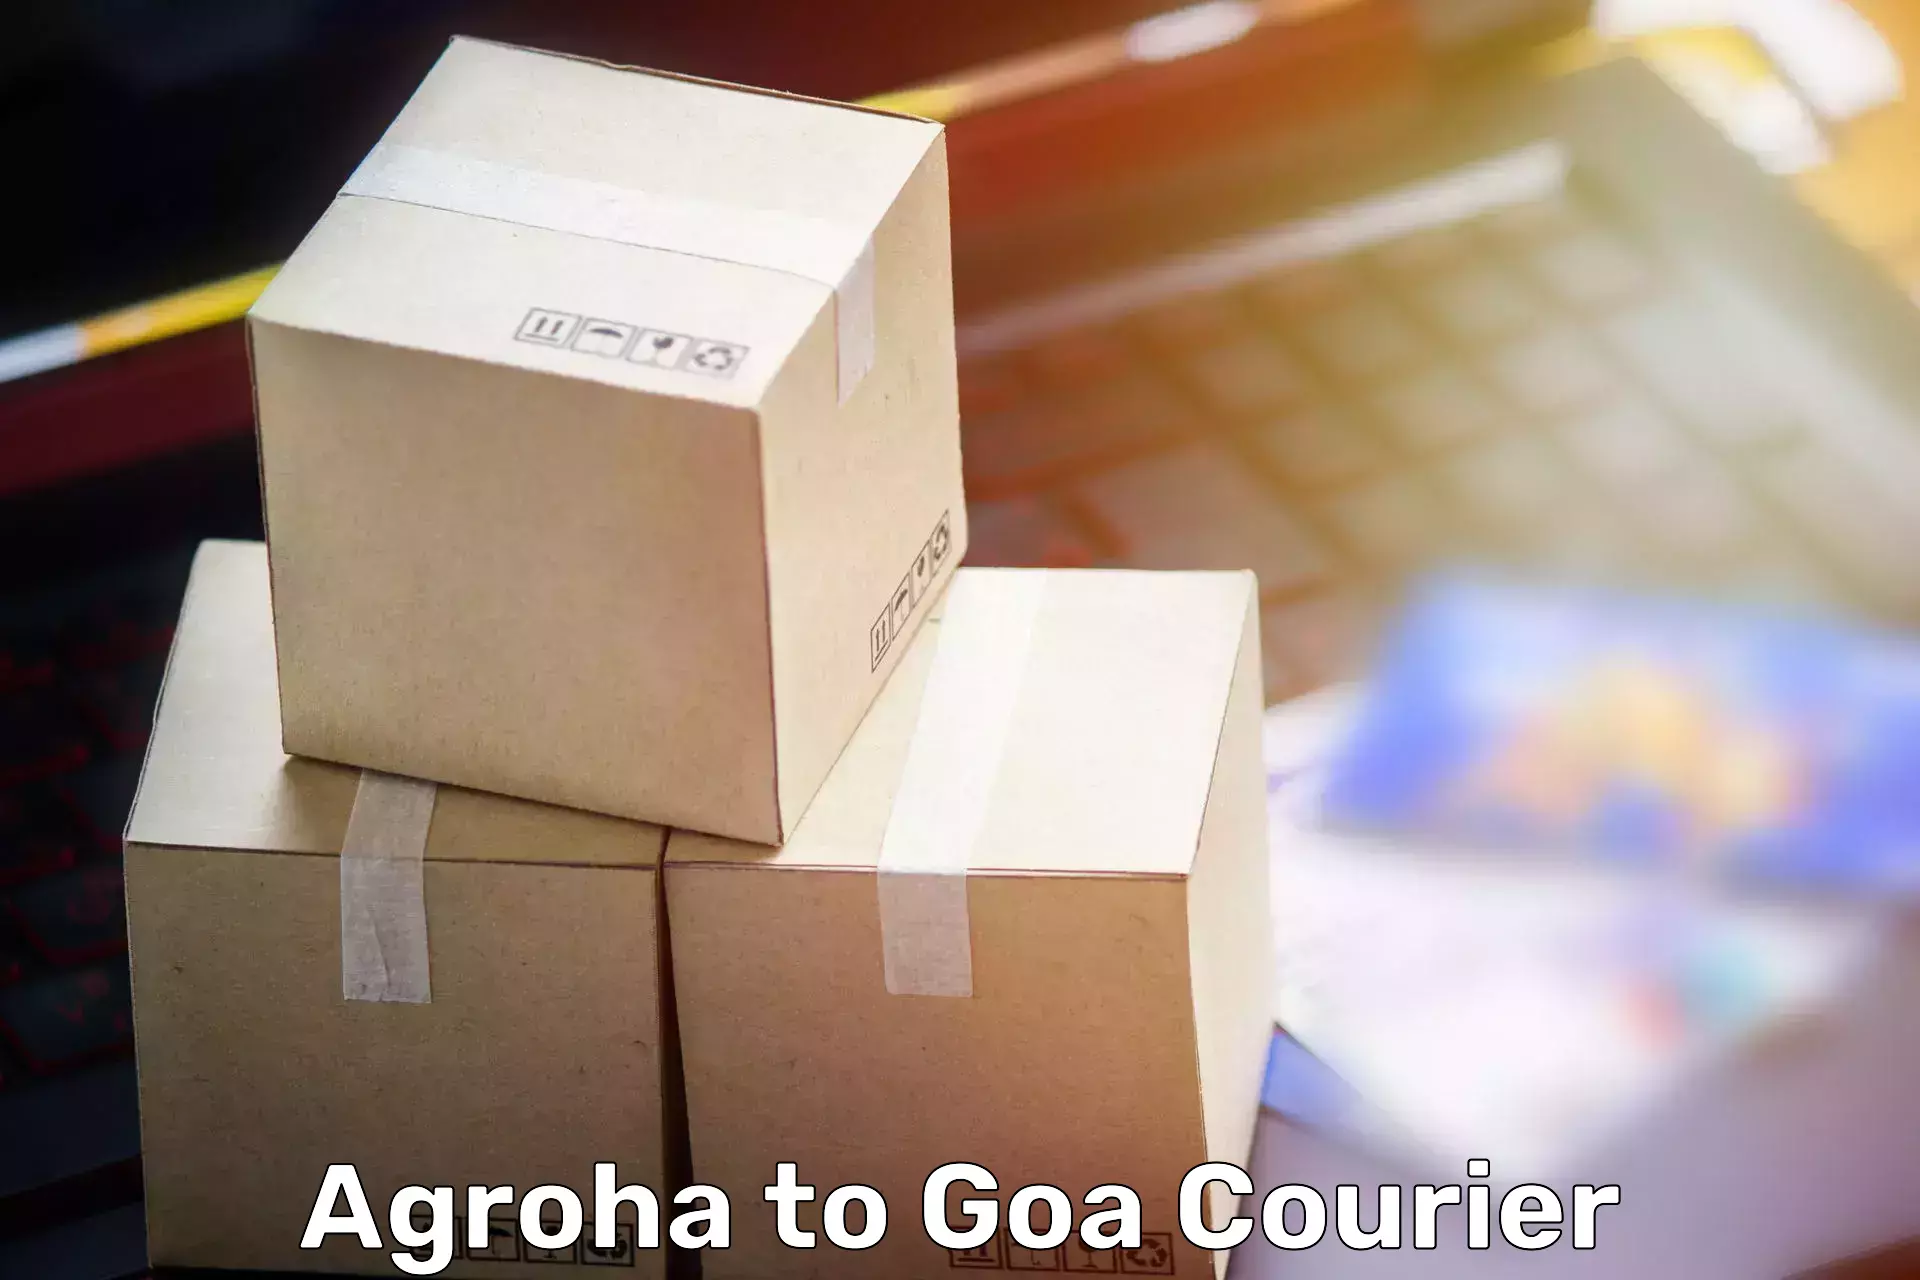 Furniture transport specialists Agroha to Goa